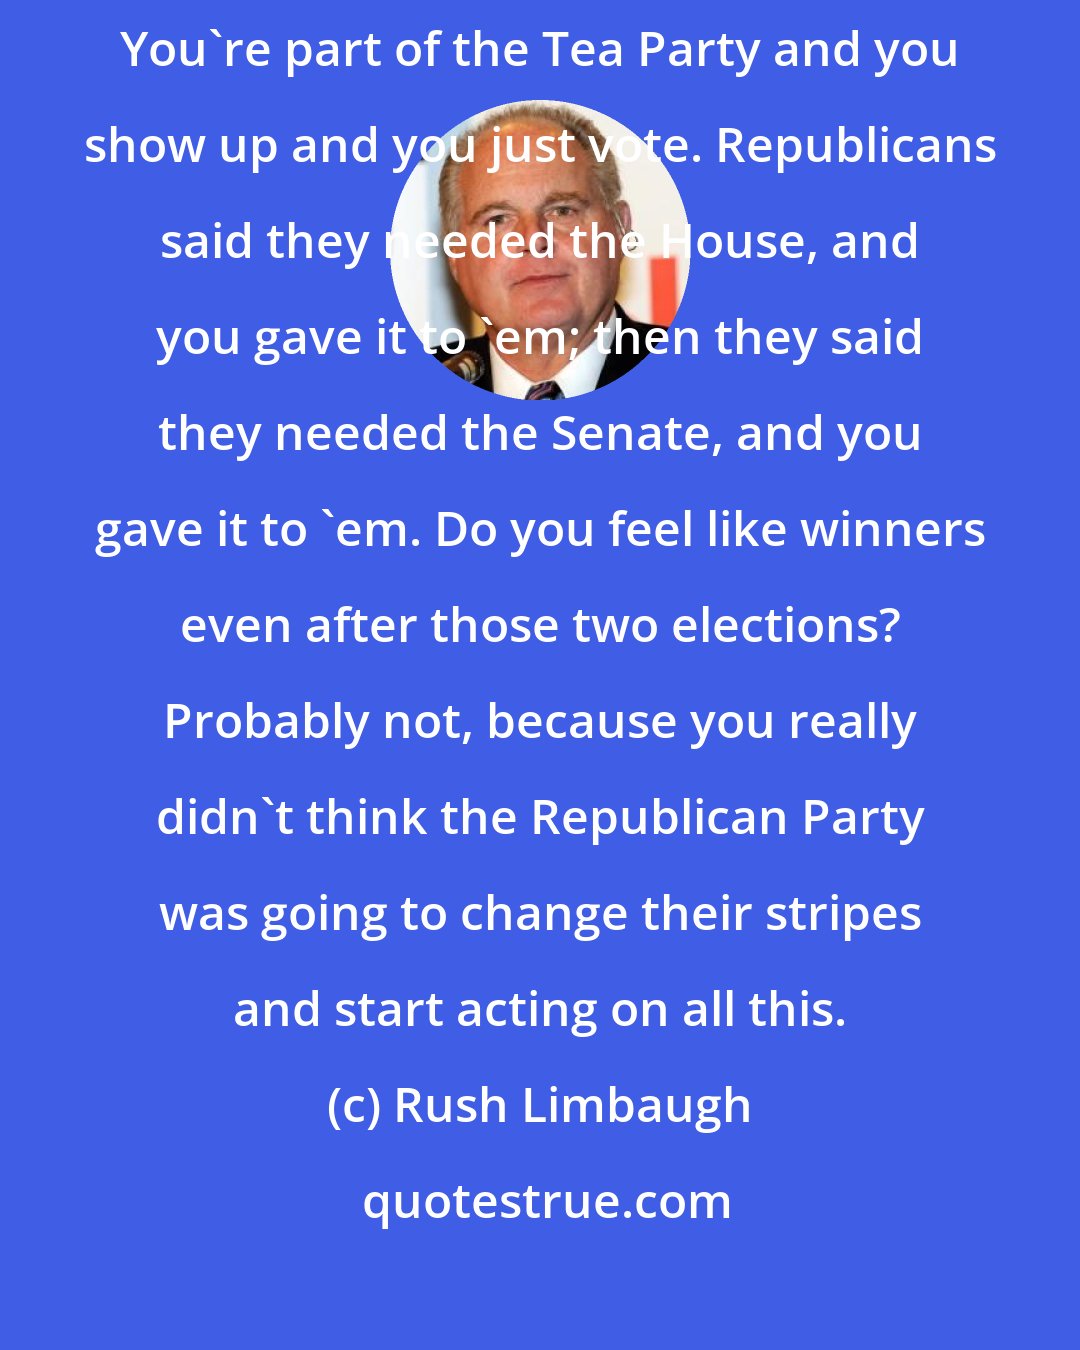 Rush Limbaugh: Folks, let me ask you a question about that. You voted in 2010, 2014. You're part of the Tea Party and you show up and you just vote. Republicans said they needed the House, and you gave it to 'em; then they said they needed the Senate, and you gave it to 'em. Do you feel like winners even after those two elections? Probably not, because you really didn't think the Republican Party was going to change their stripes and start acting on all this.